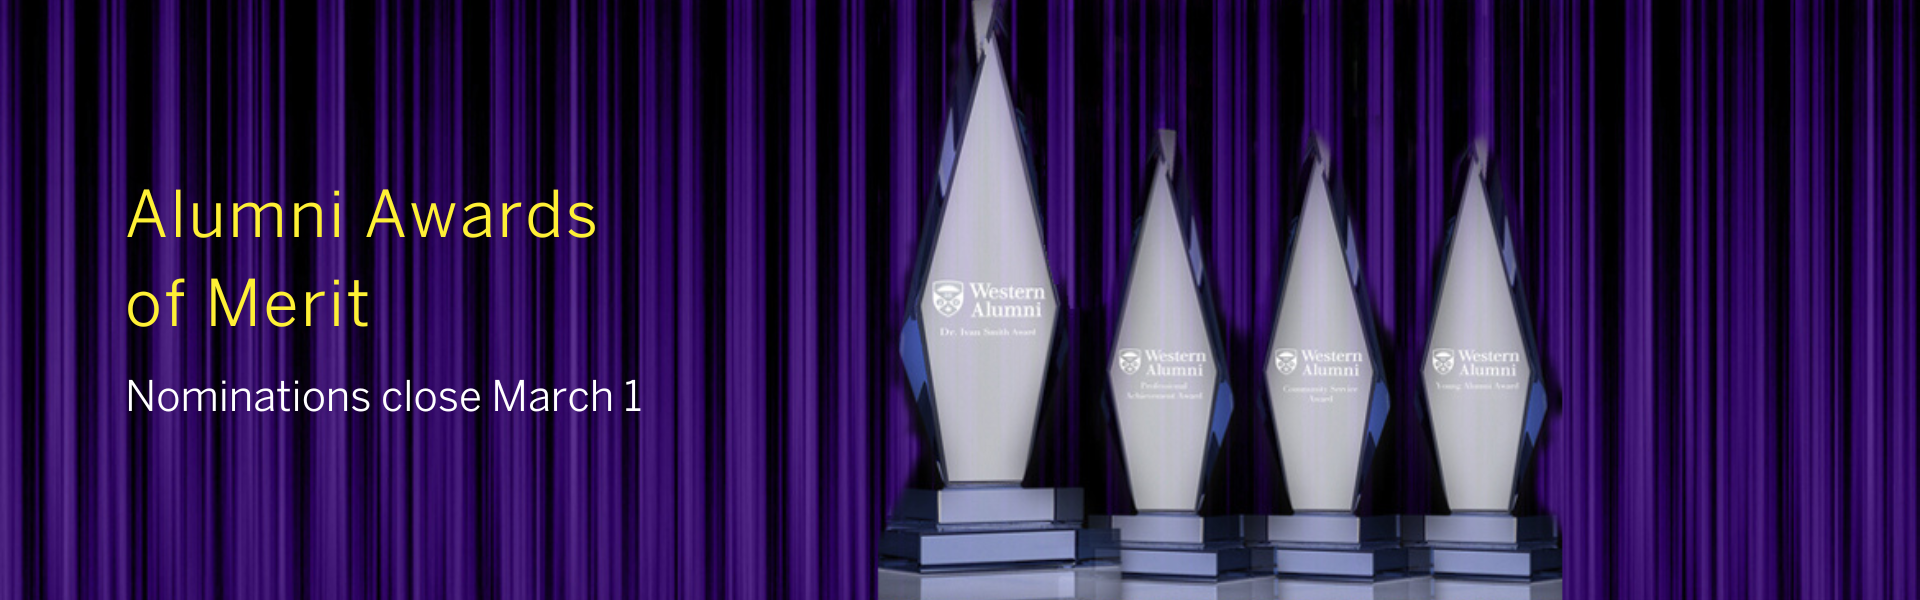 Awards of Merit shown in front of a purple curtain with text 